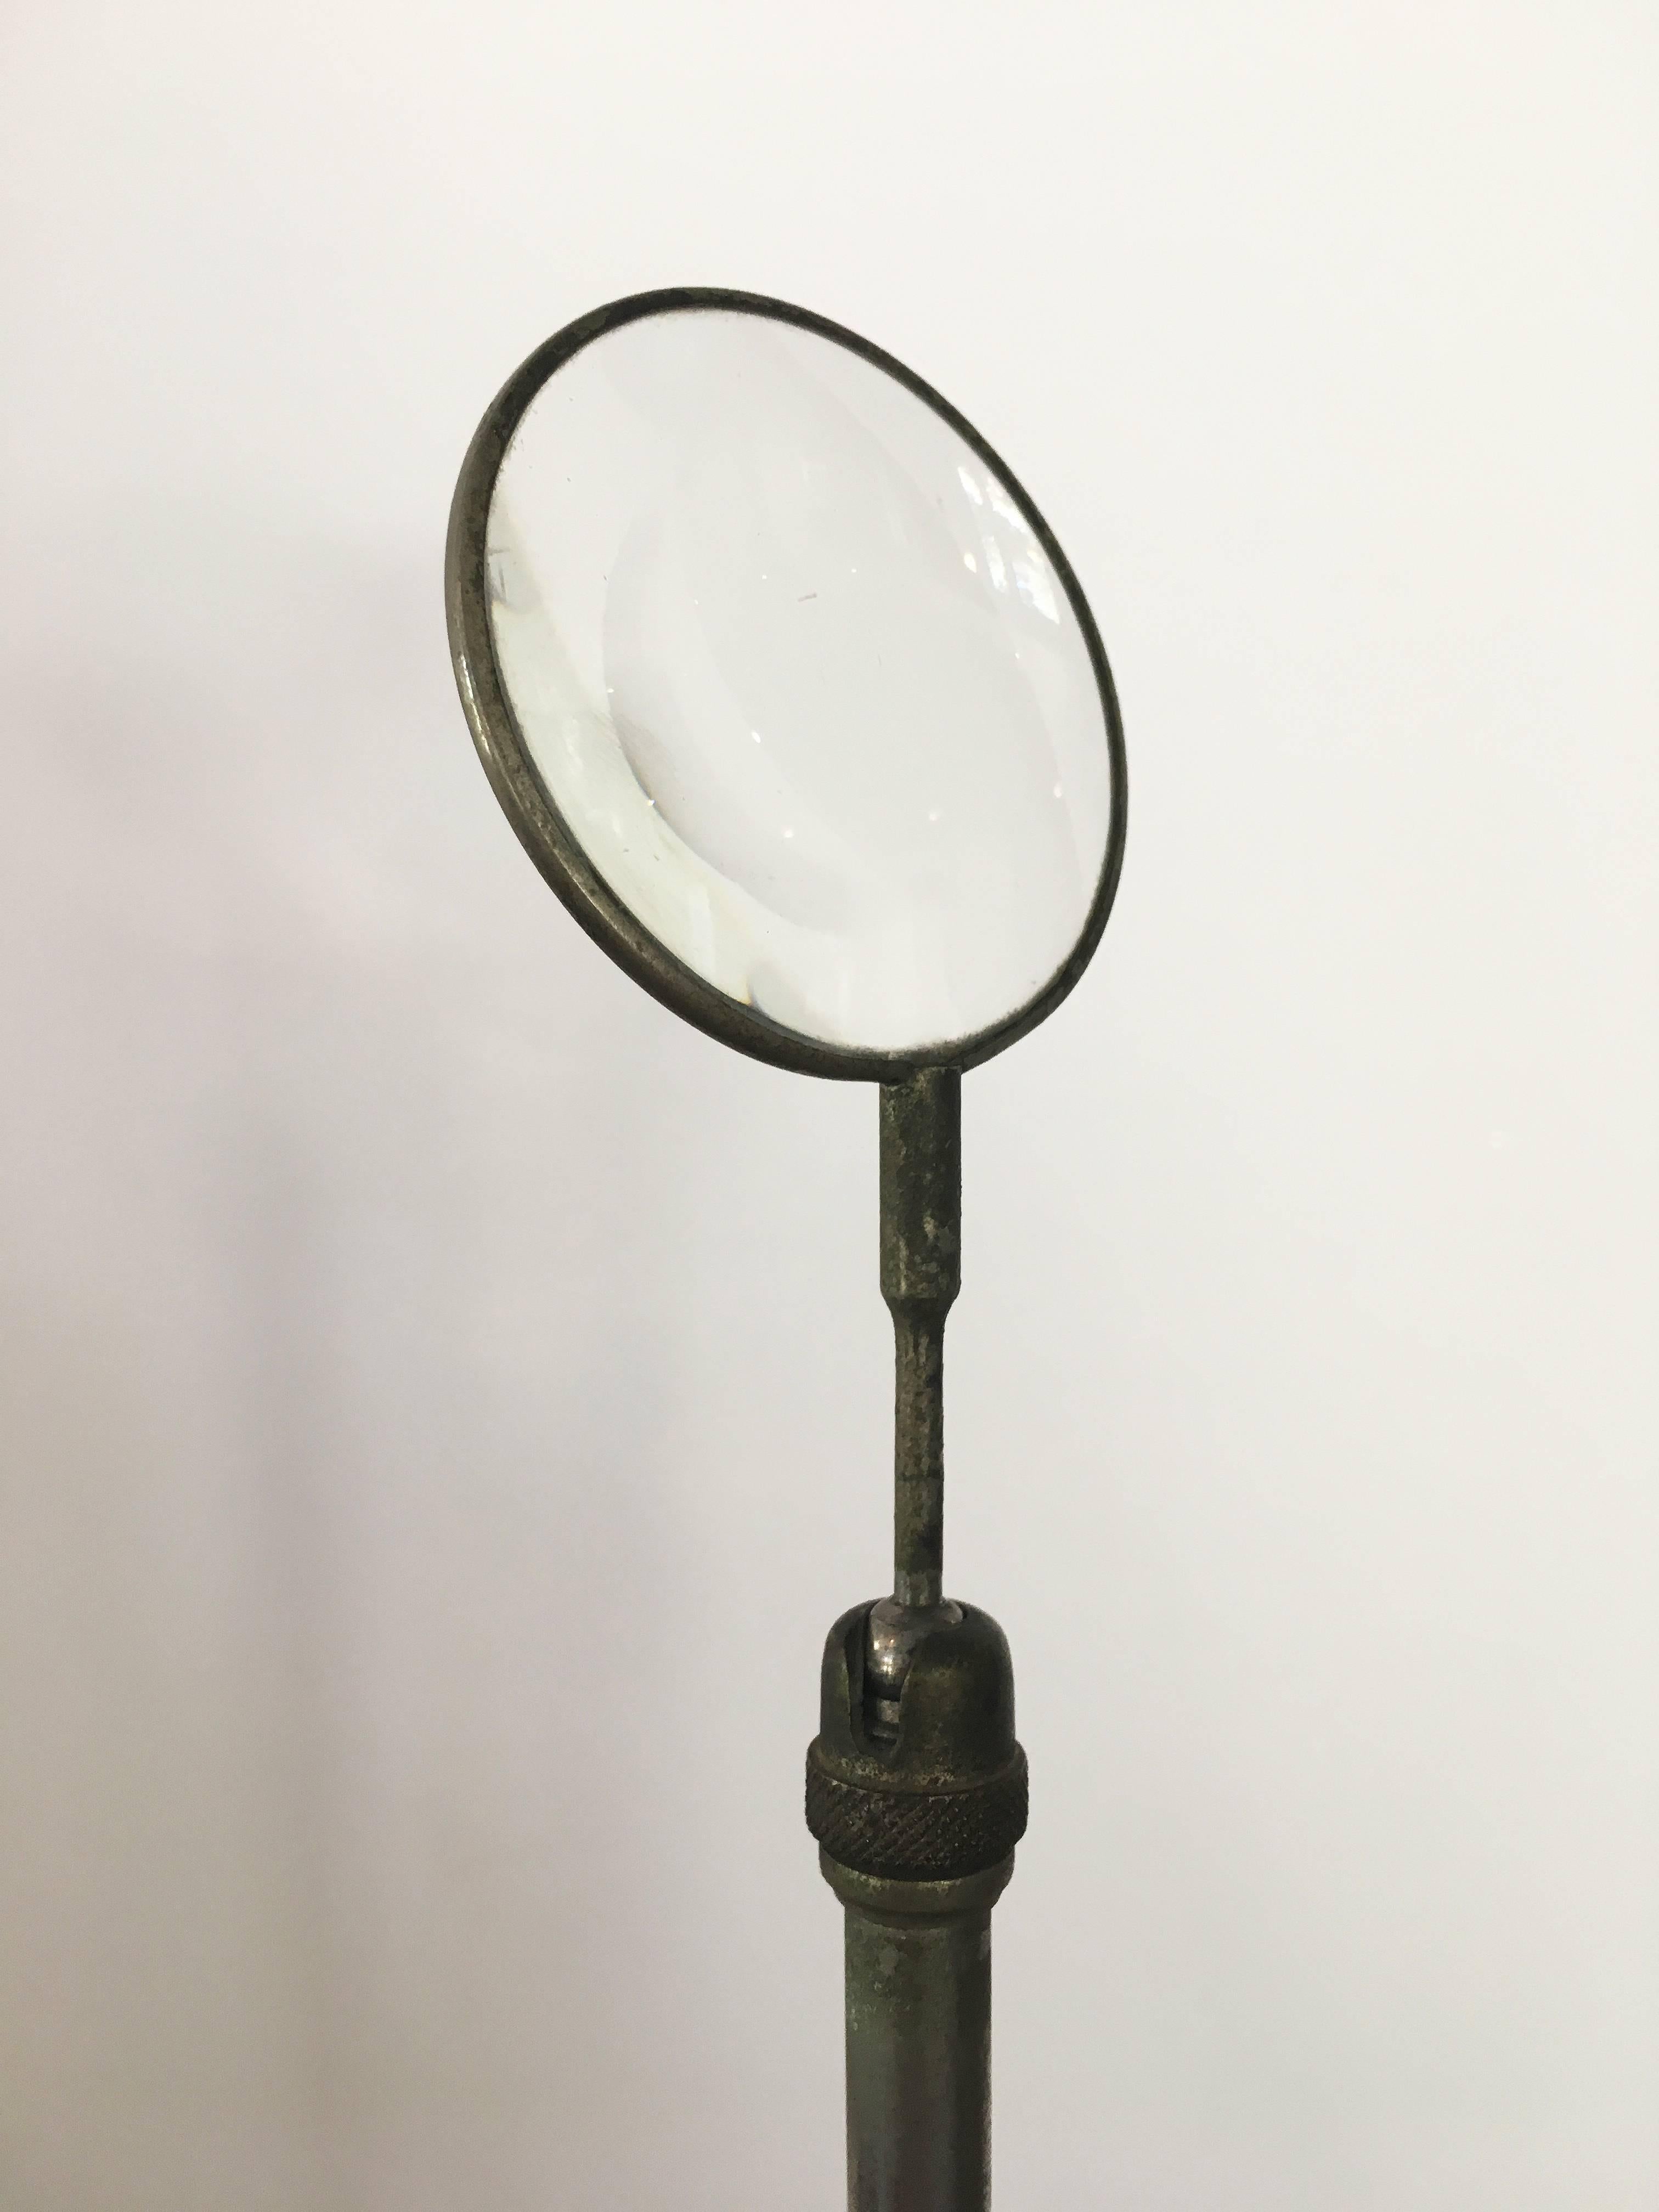 Freestanding vintage Victorian magnifying glass on a stand.